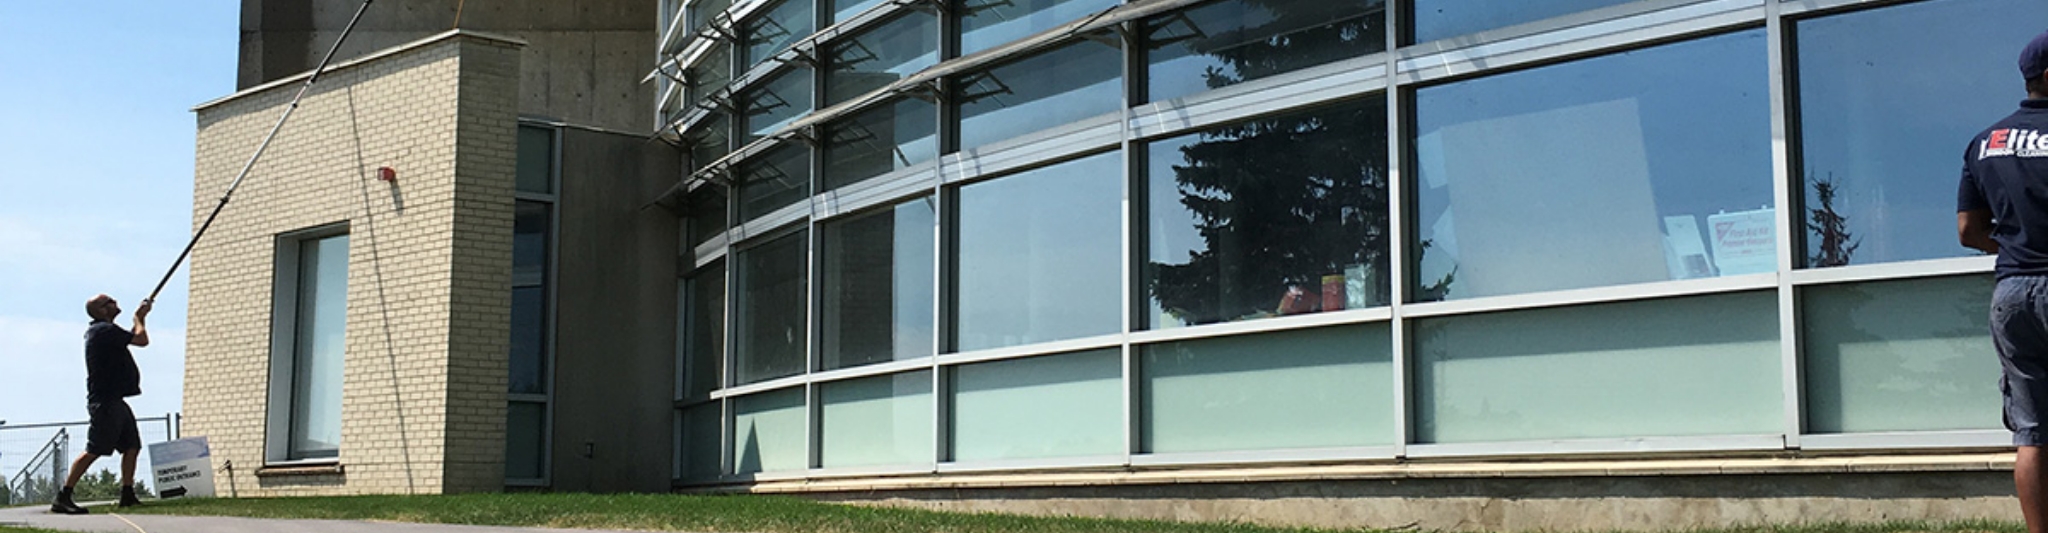 Commercial Window Cleaning in Calgary